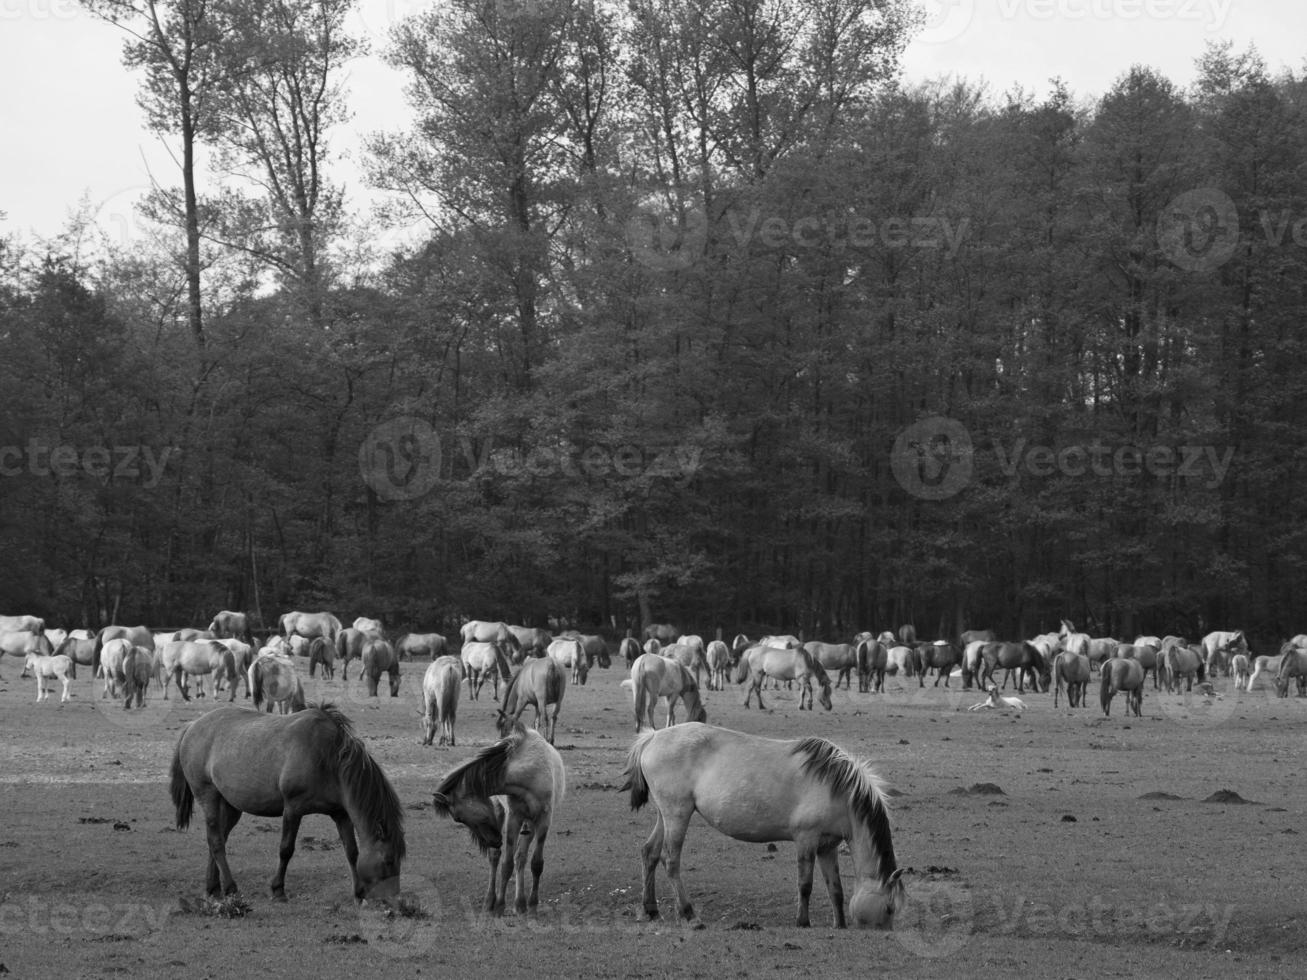 widl horses in germany photo